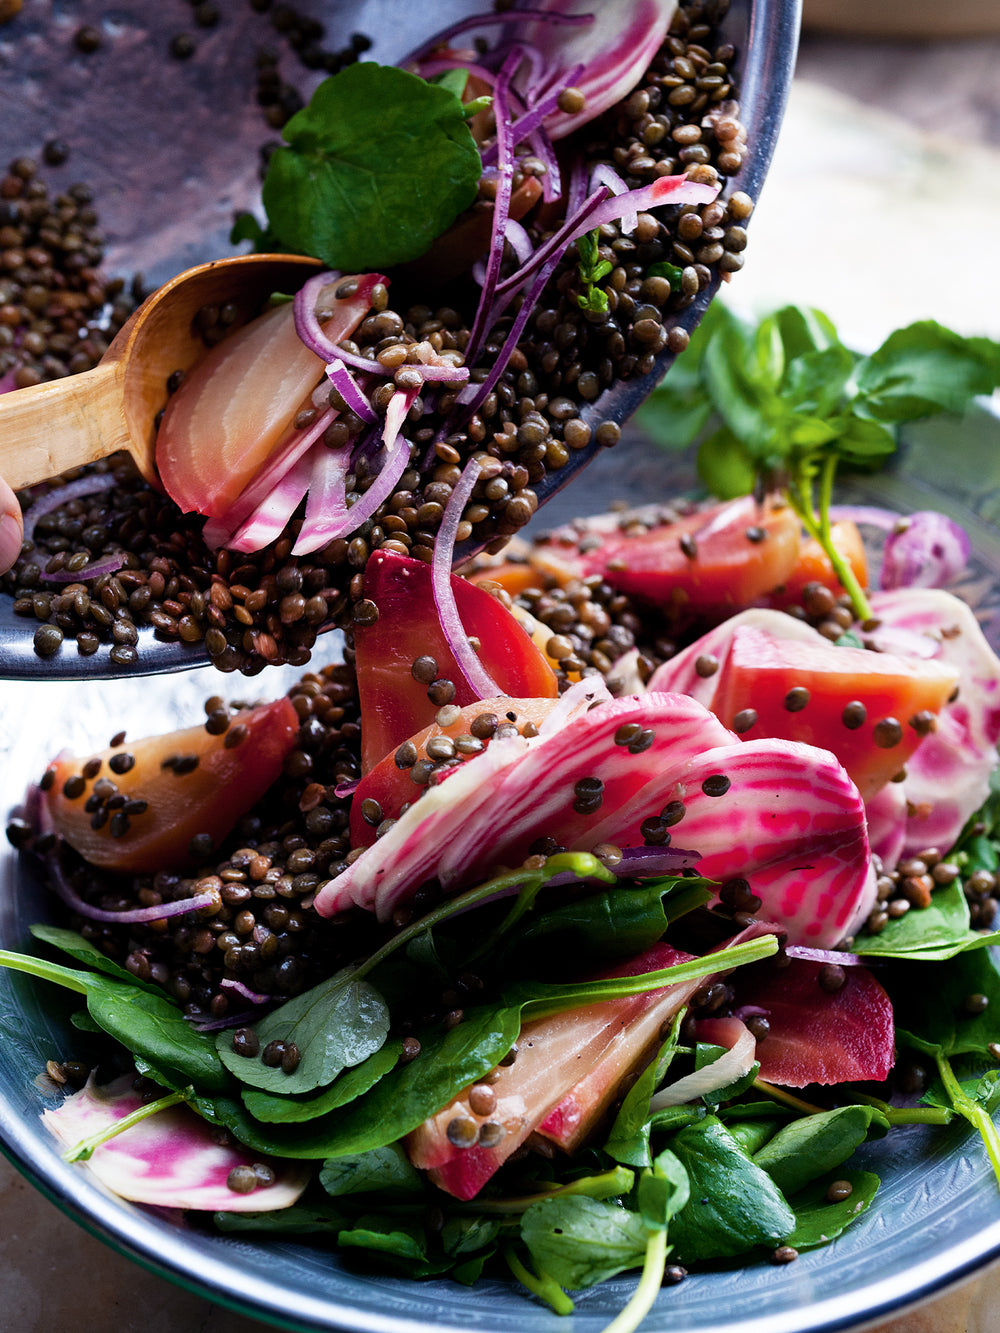 Candy beetroot with lentils and yuzu